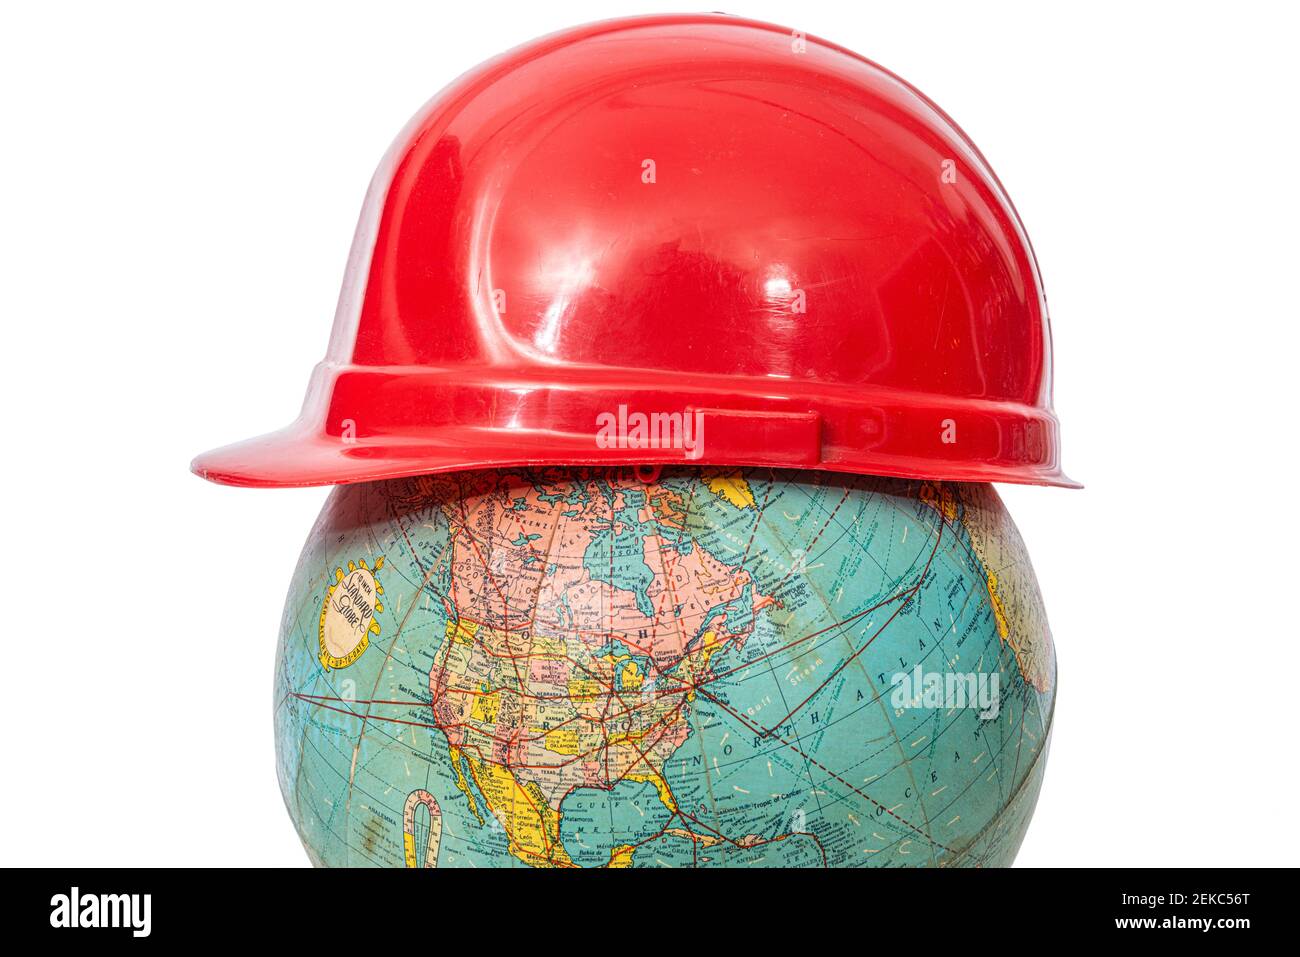 Horizontal shot of a side view of an old red hard hat sitting on top of a pre world war 2 world globe.  White background. Stock Photo